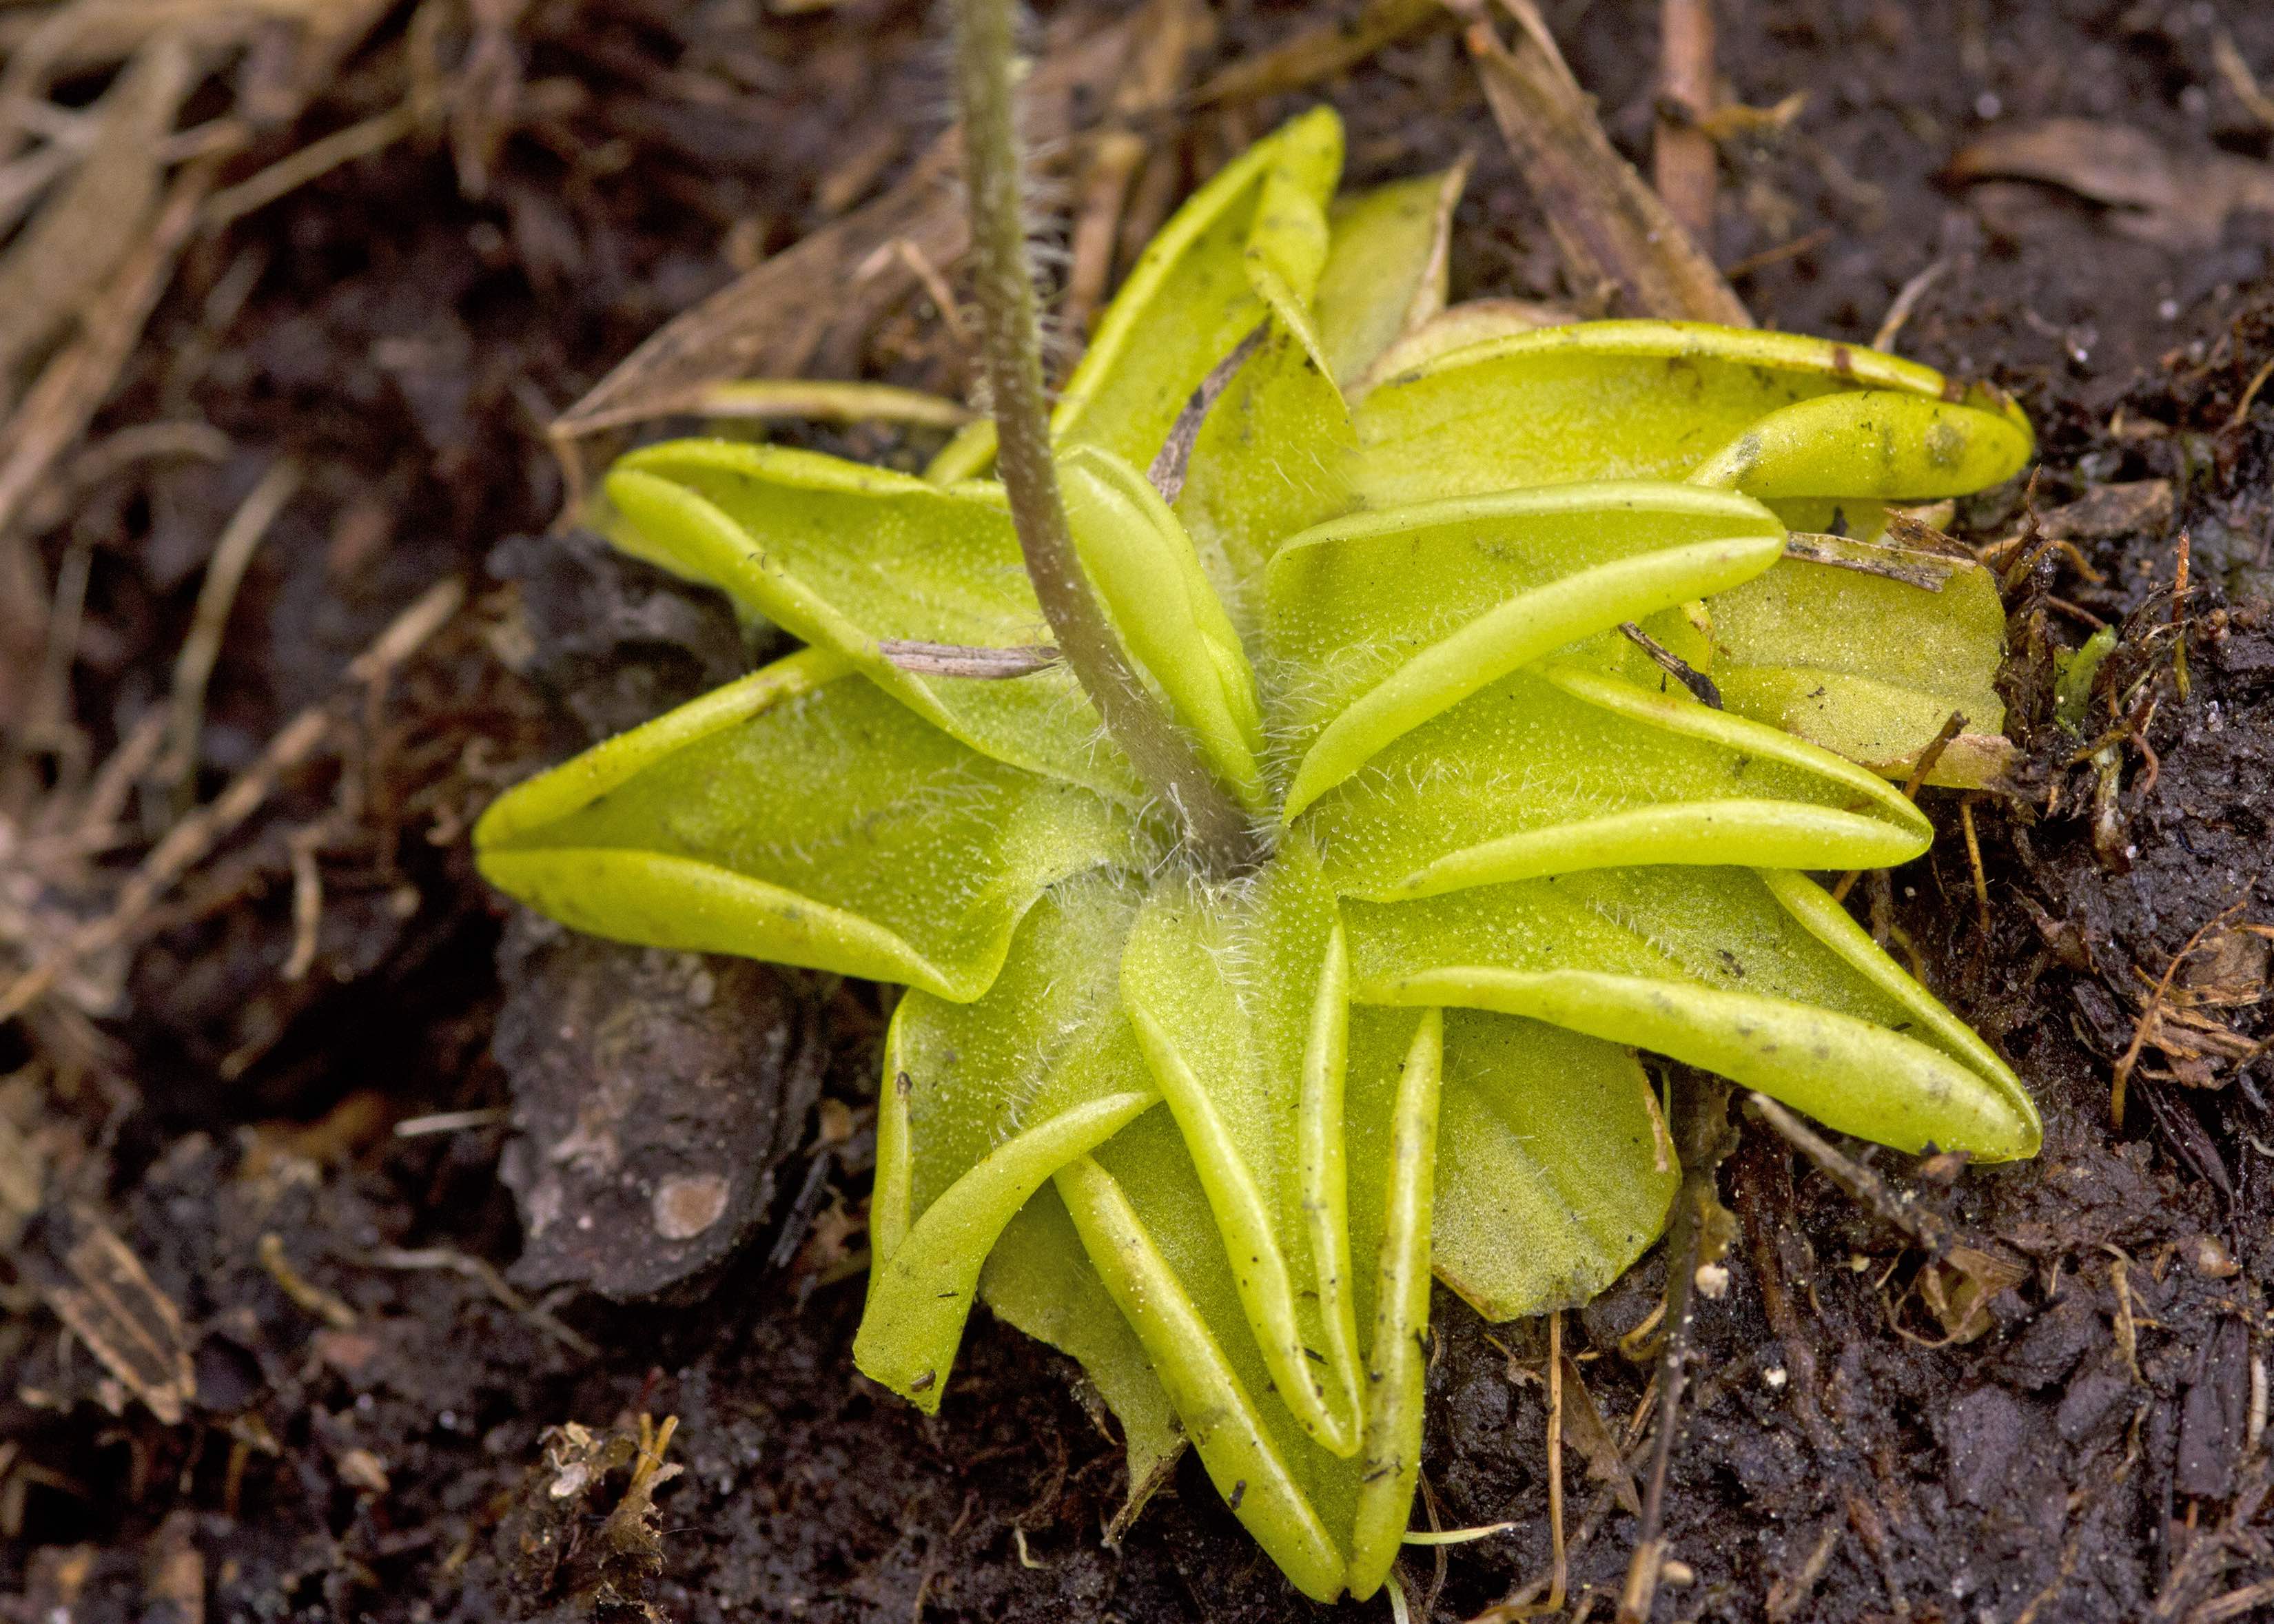 The Scientific Name is Pinguicula caerulea. You will likely hear them called Blue Butterwort, Blueflower Butterwort. This picture shows the Basal rosette of broadly elliptical, light green leaves that are sticky above to capture insects. The basal leaves are identical to P. lutea so need the flowers to distinguish the two species. of Pinguicula caerulea